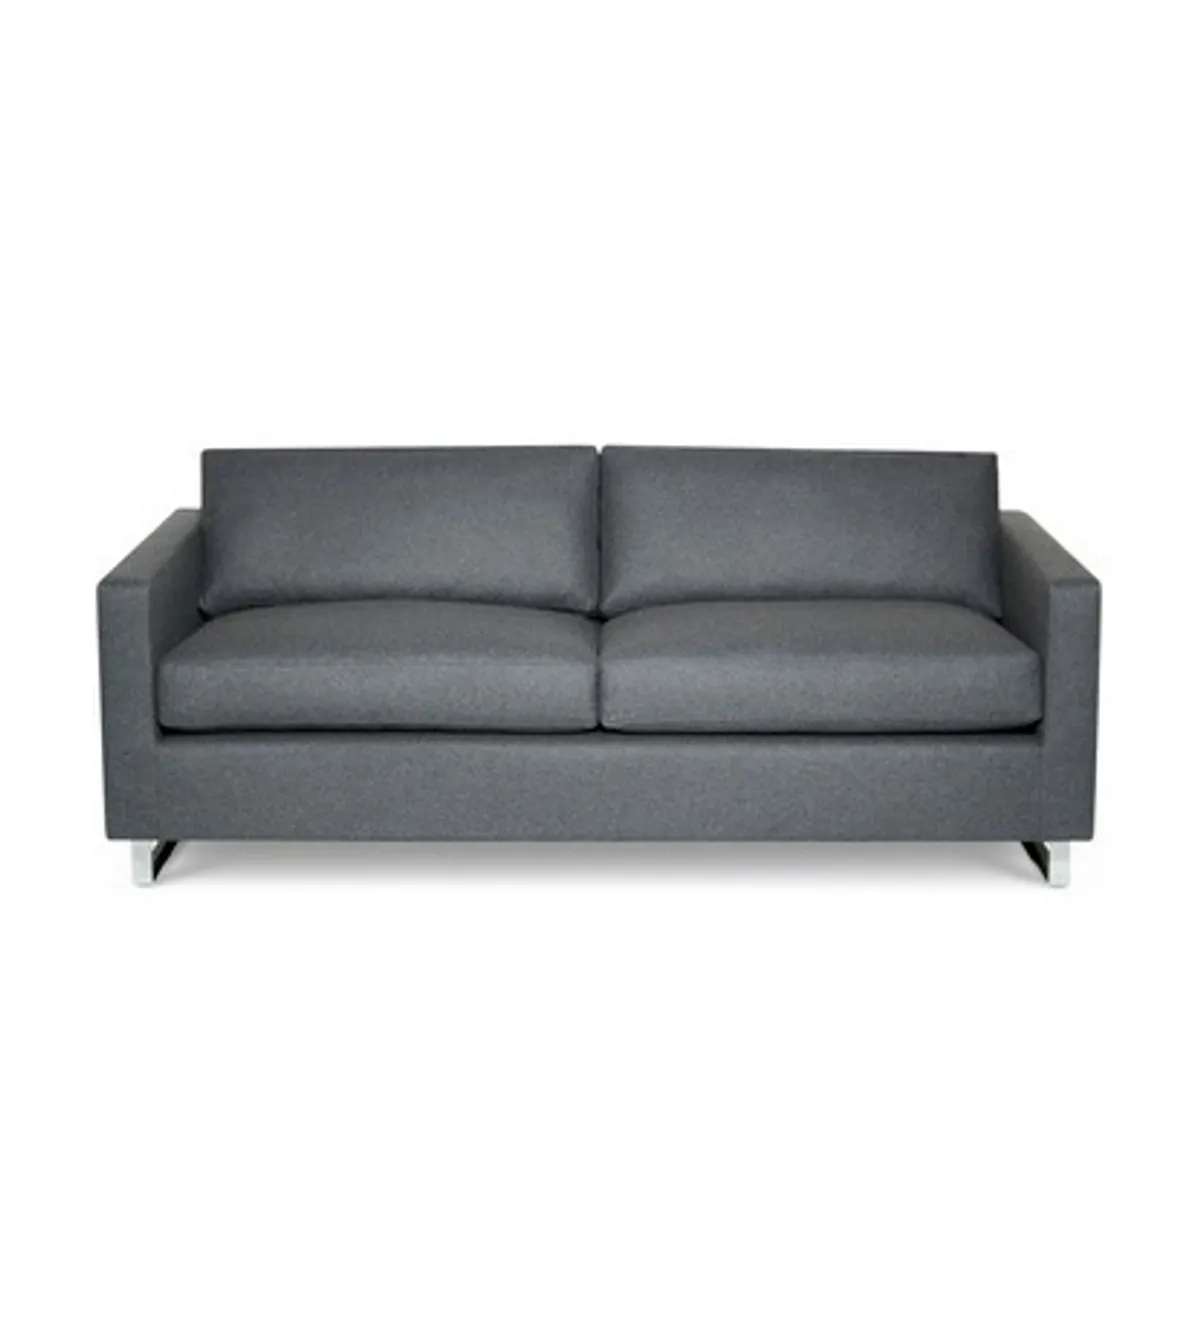 Palma Sofa By Inside Out Contracts